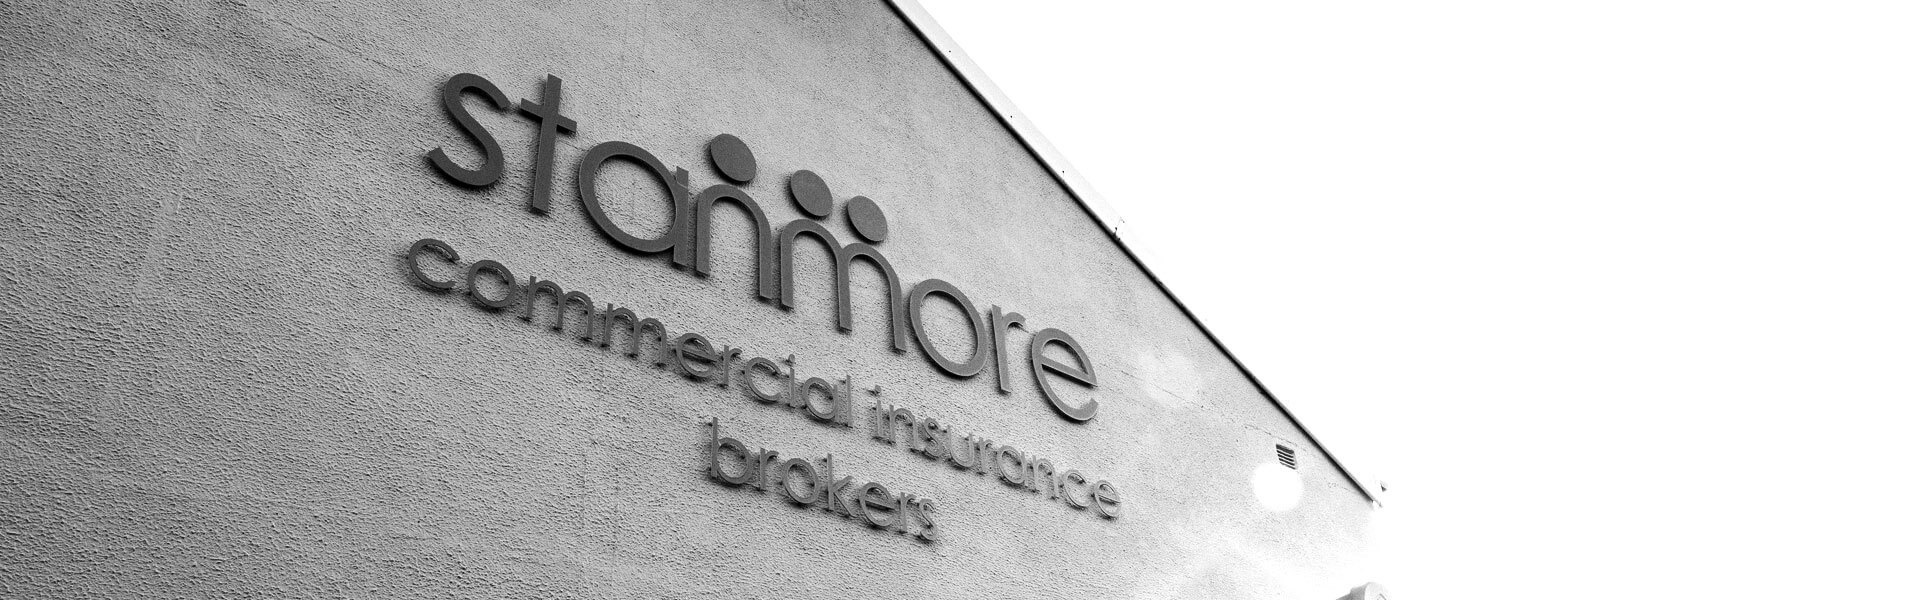 Stanmore Insurance offices